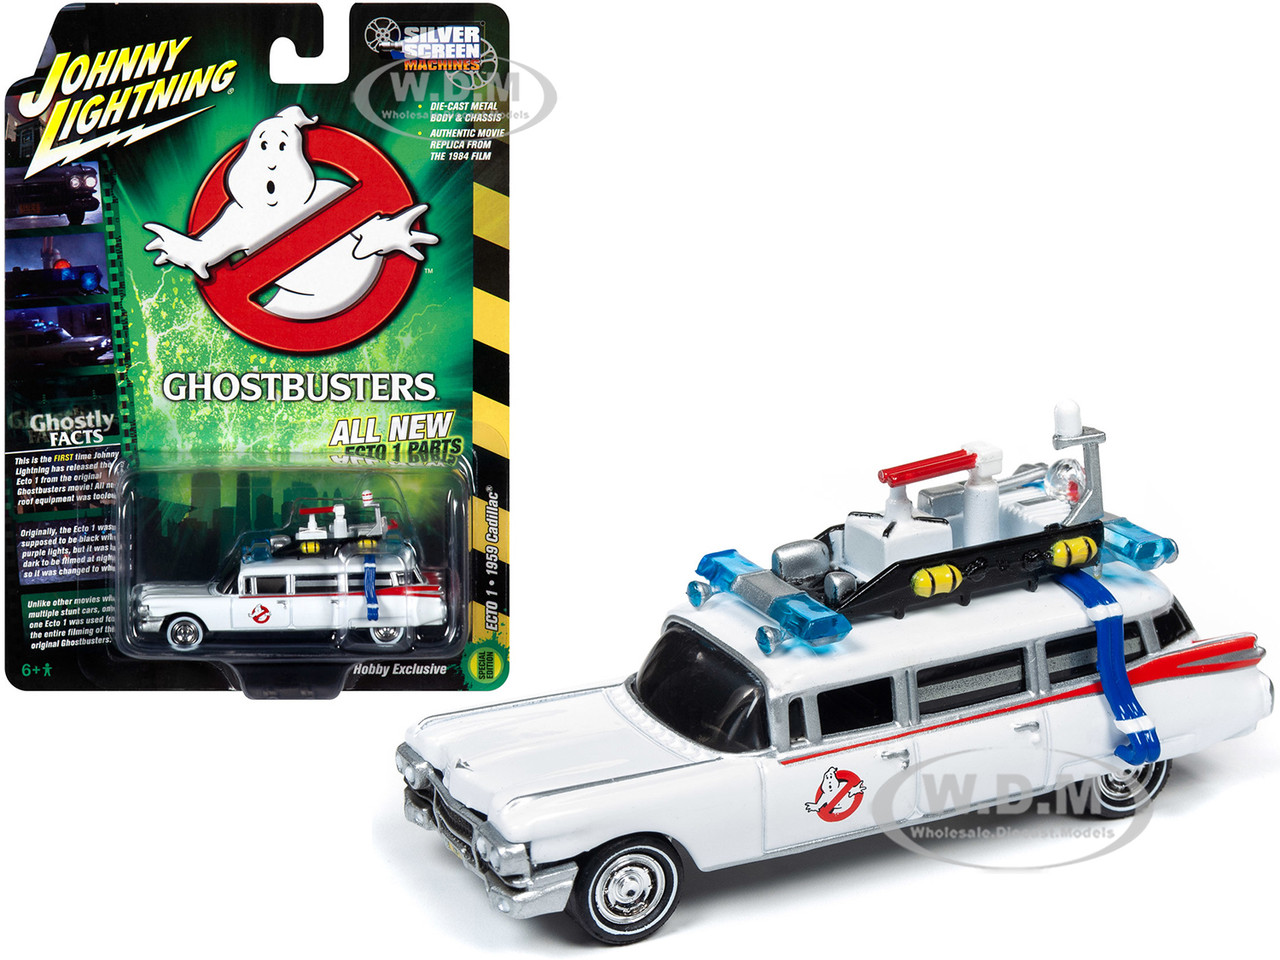 1959 CADILLAC Ecto 1 a /"Ghostbusters/"//JOHNNY LIGHTNING 1:64